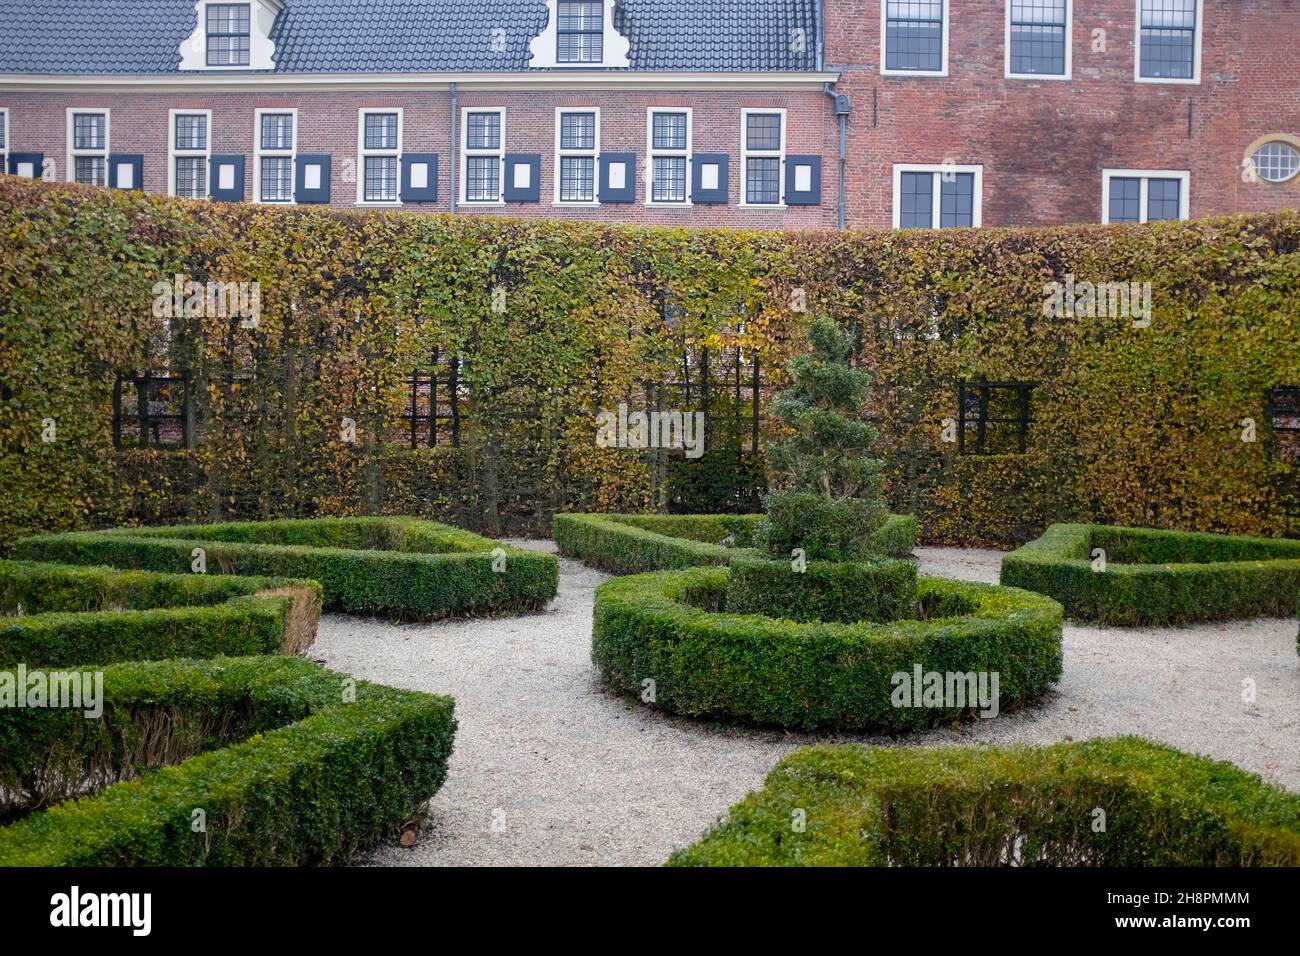 Prinsenhof & Prinsentuin (17th century Prince's Court and Gardens) in the historic center of Groningen, The Netherlands. Stock Photo